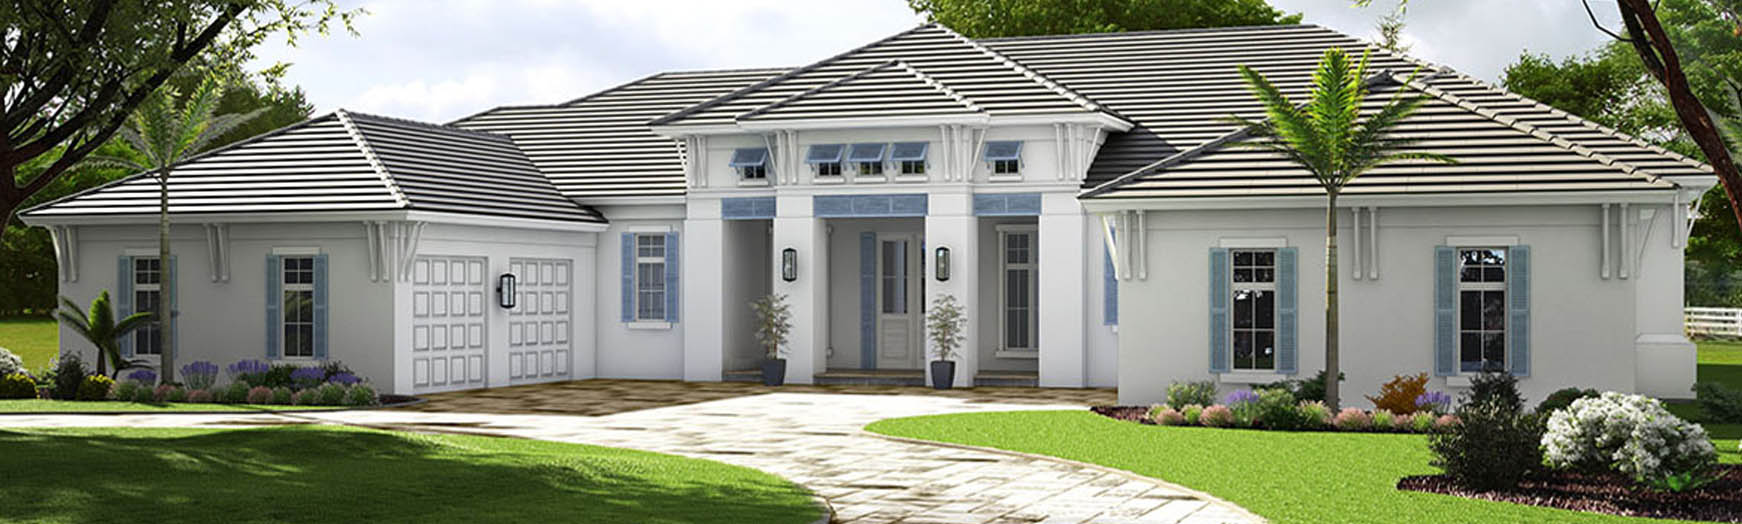 3D Architectural Rendering, Architectural 3D Visualization